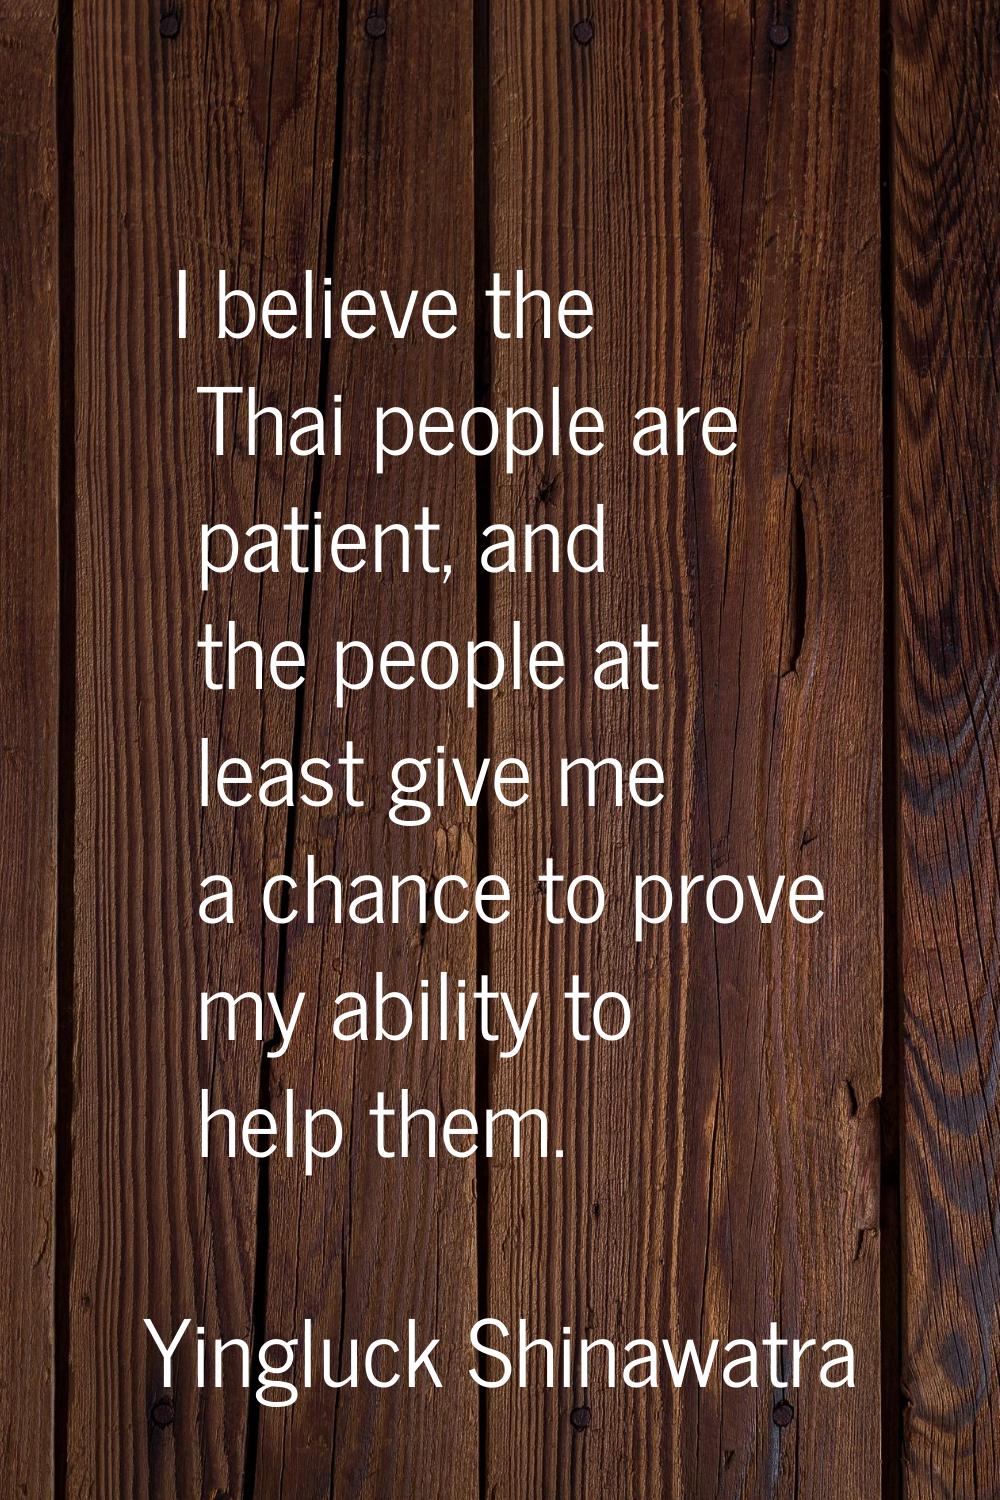 I believe the Thai people are patient, and the people at least give me a chance to prove my ability